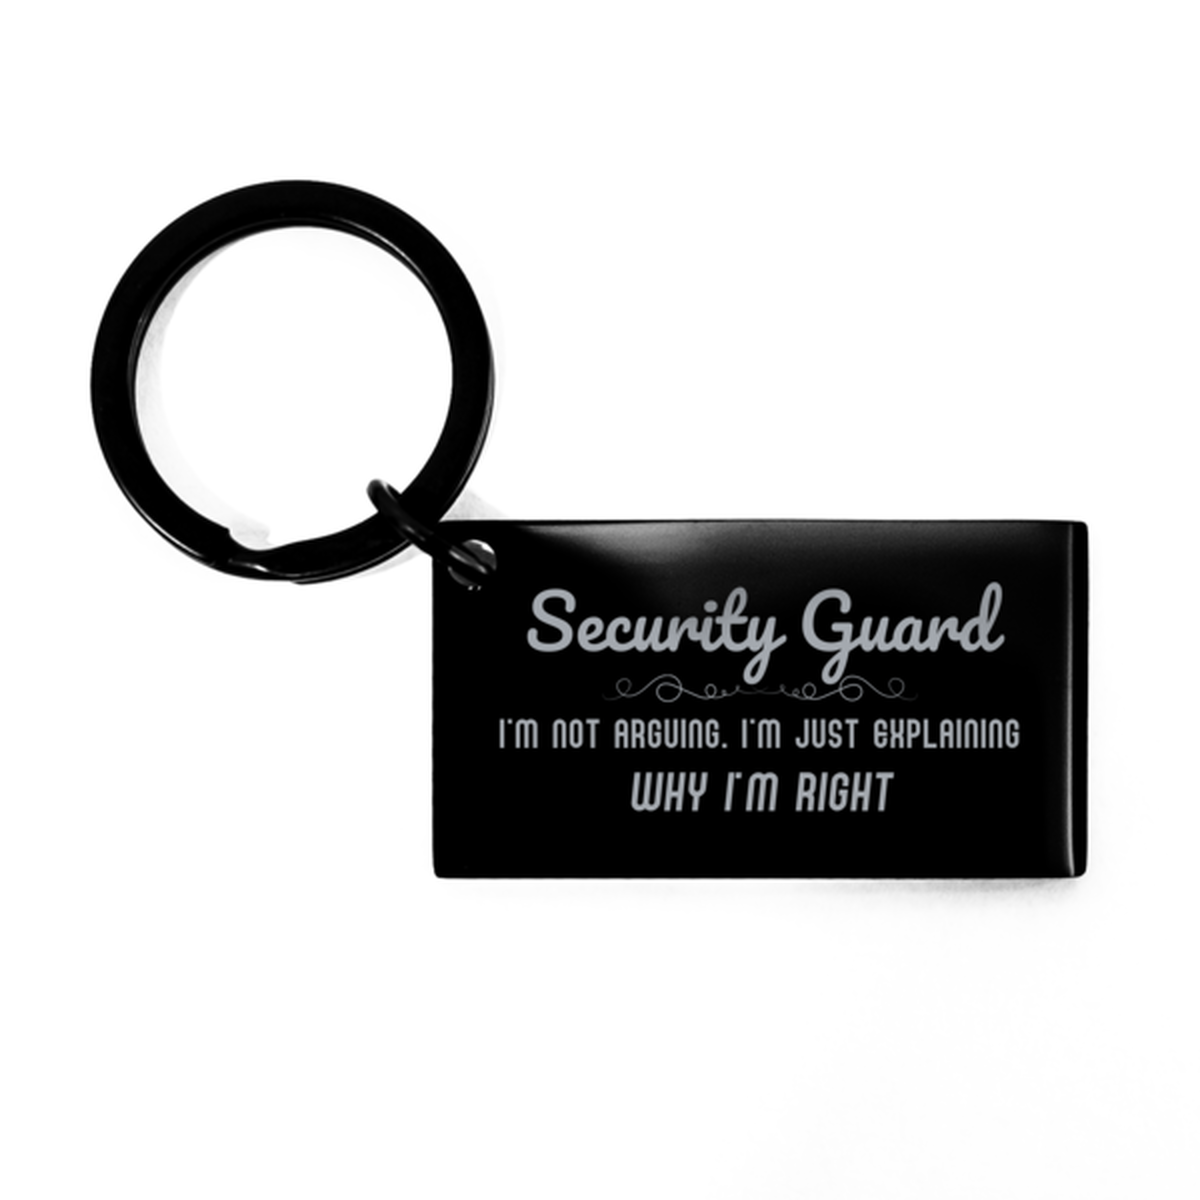 Security Guard I'm not Arguing. I'm Just Explaining Why I'm RIGHT Keychain, Funny Saying Quote Security Guard Gifts For Security Guard Graduation Birthday Christmas Gifts for Men Women Coworker